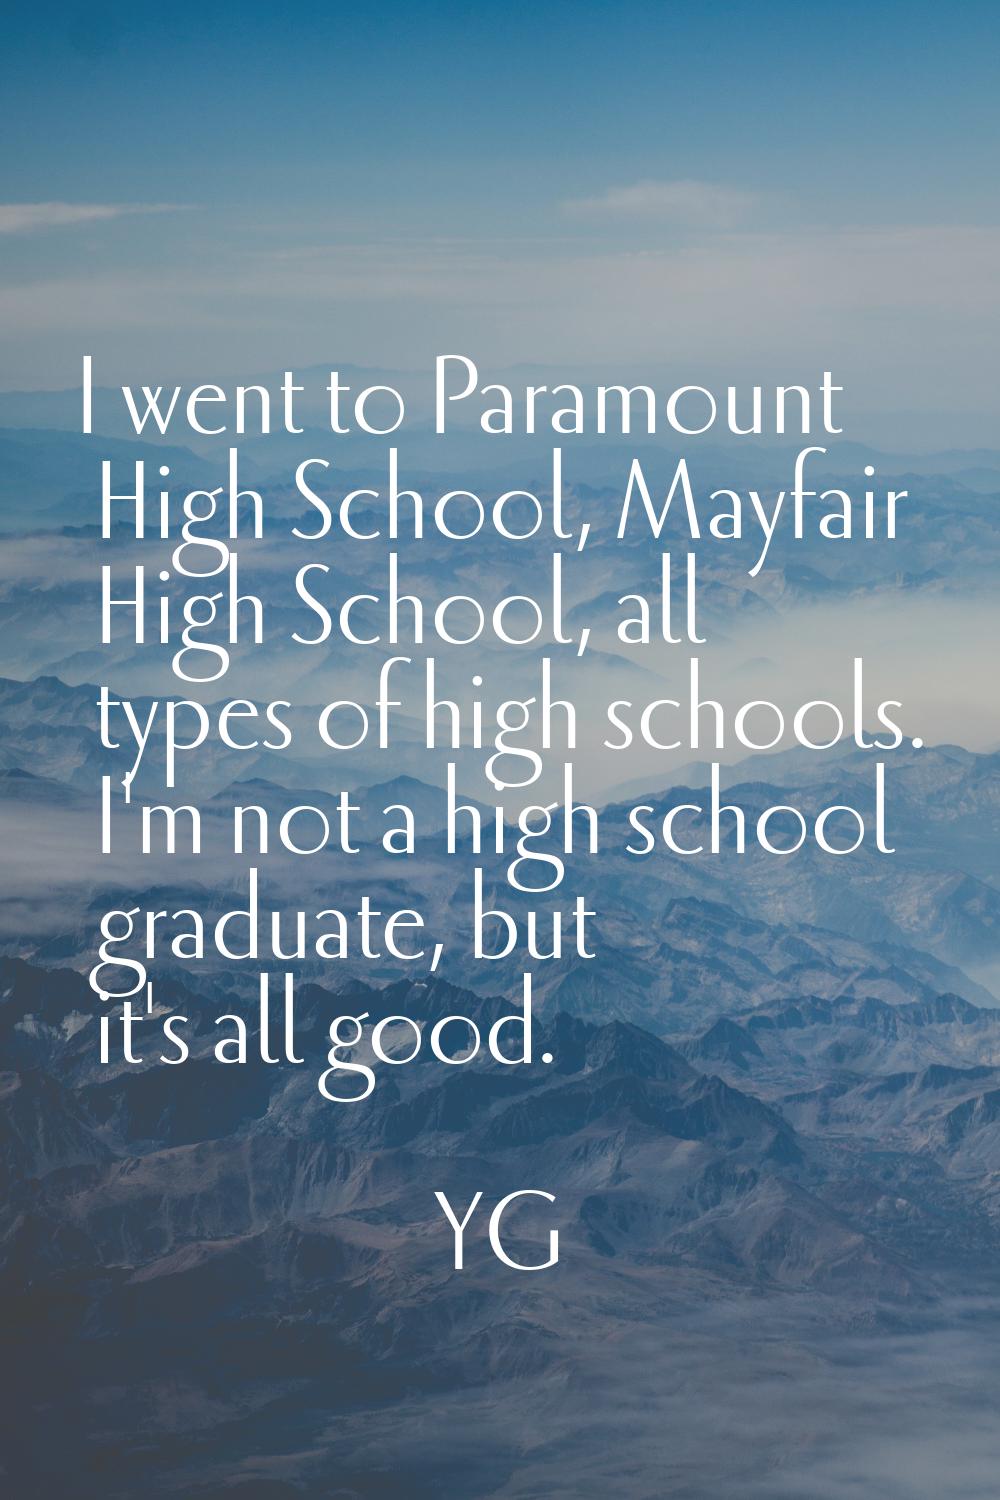 I went to Paramount High School, Mayfair High School, all types of high schools. I'm not a high sch